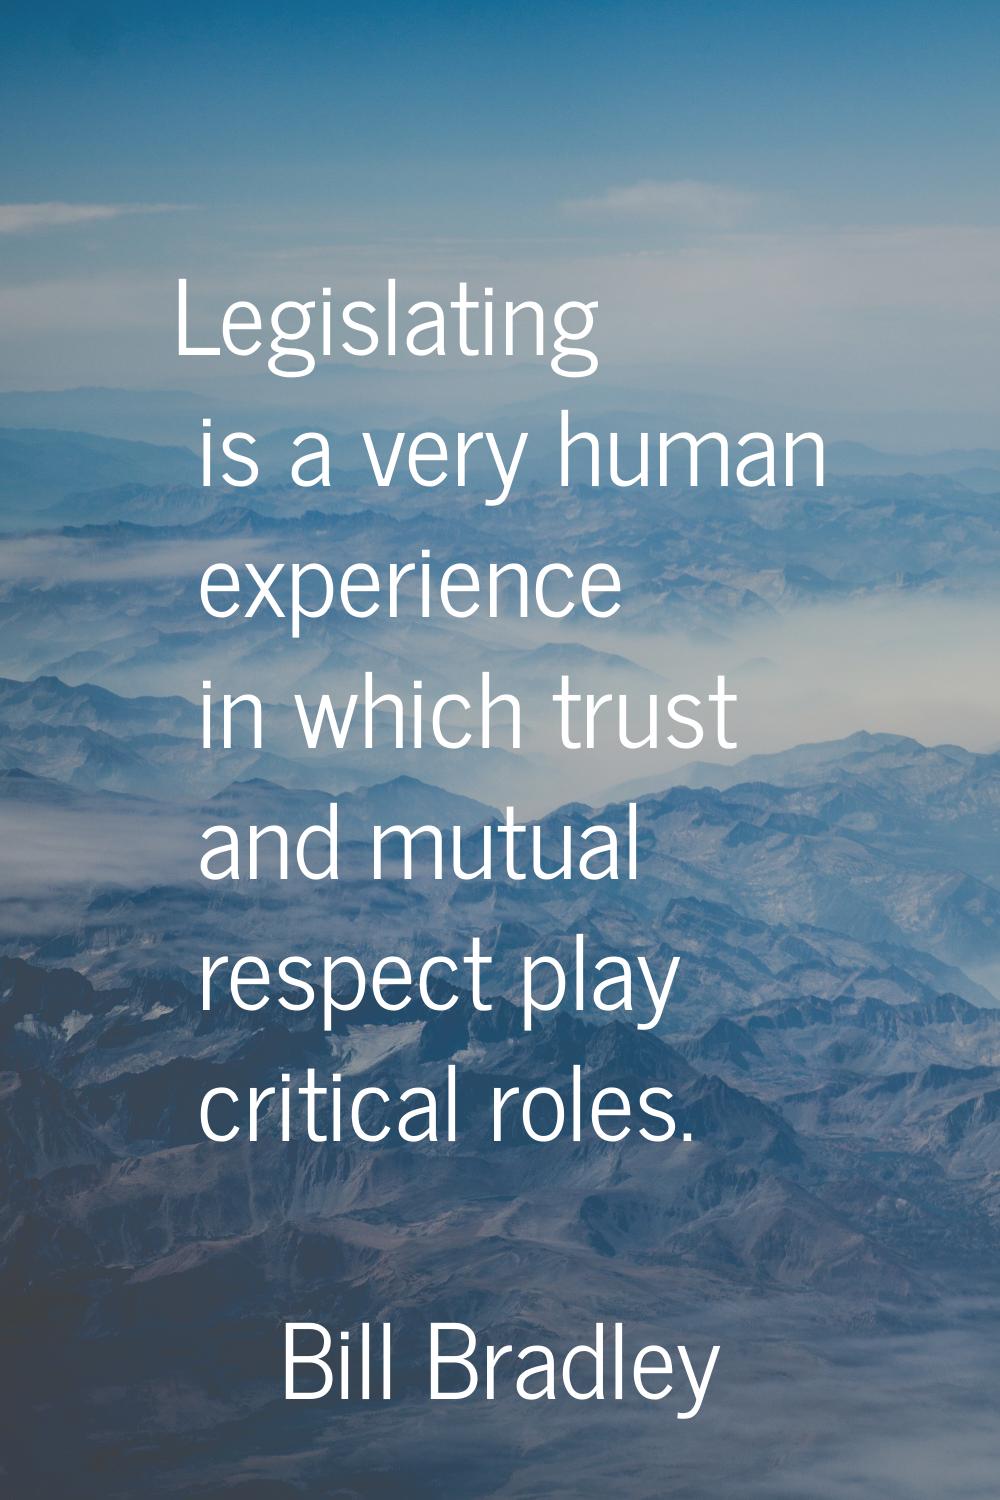 Legislating is a very human experience in which trust and mutual respect play critical roles.